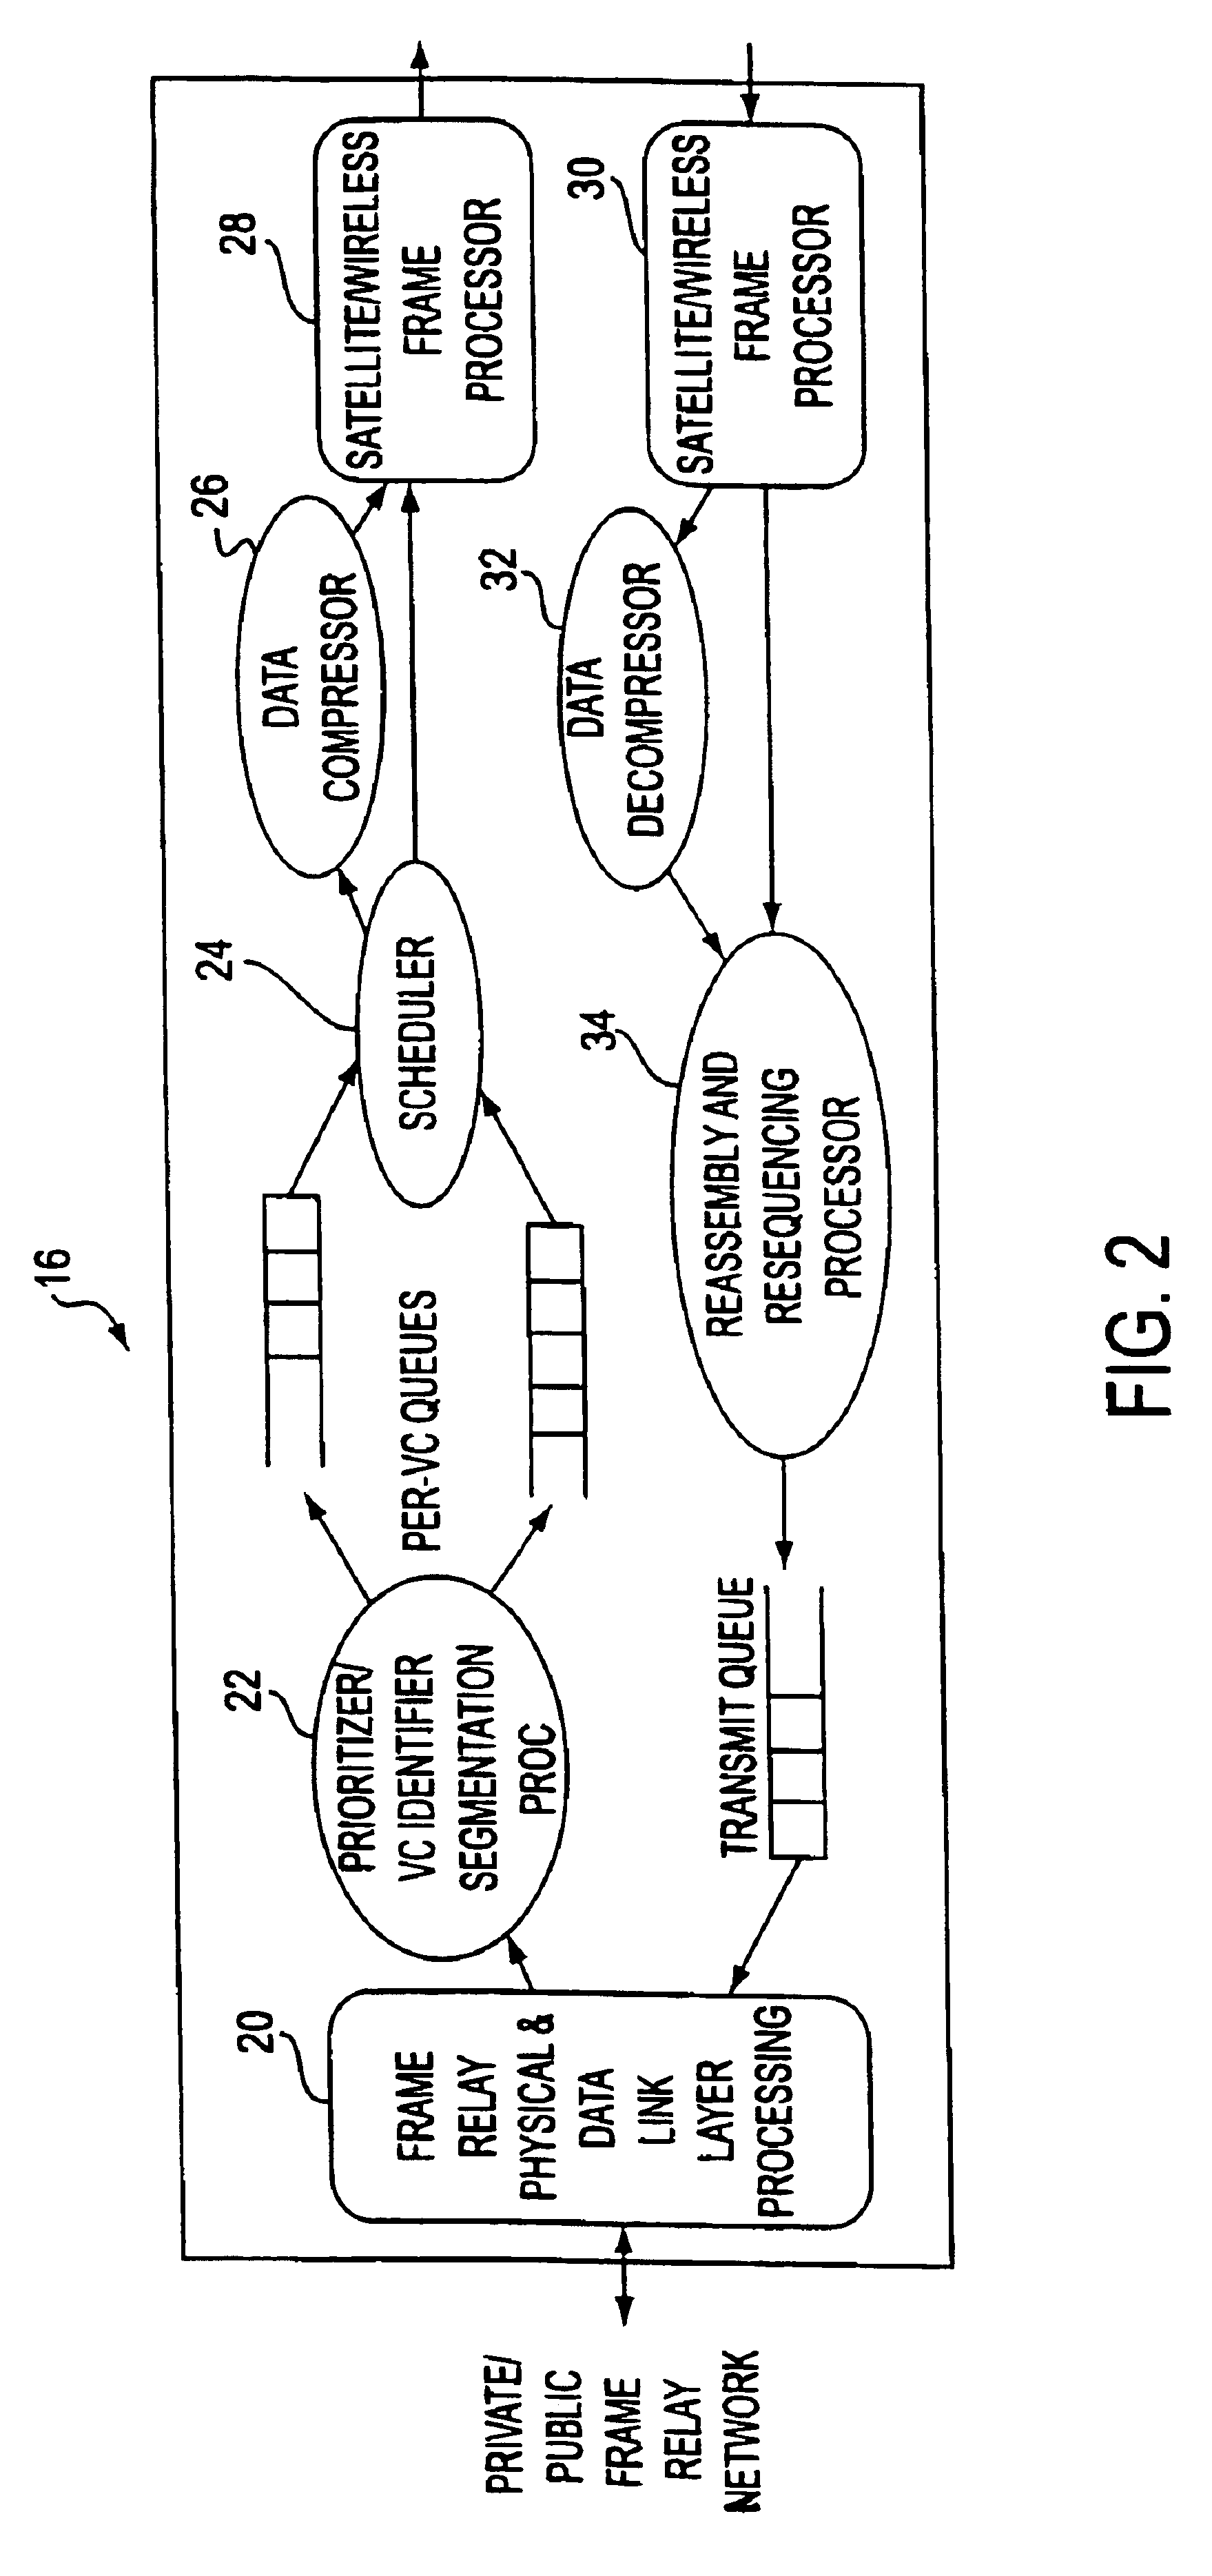 Method and system for transport of frame relay traffic over satellite/wireless networks